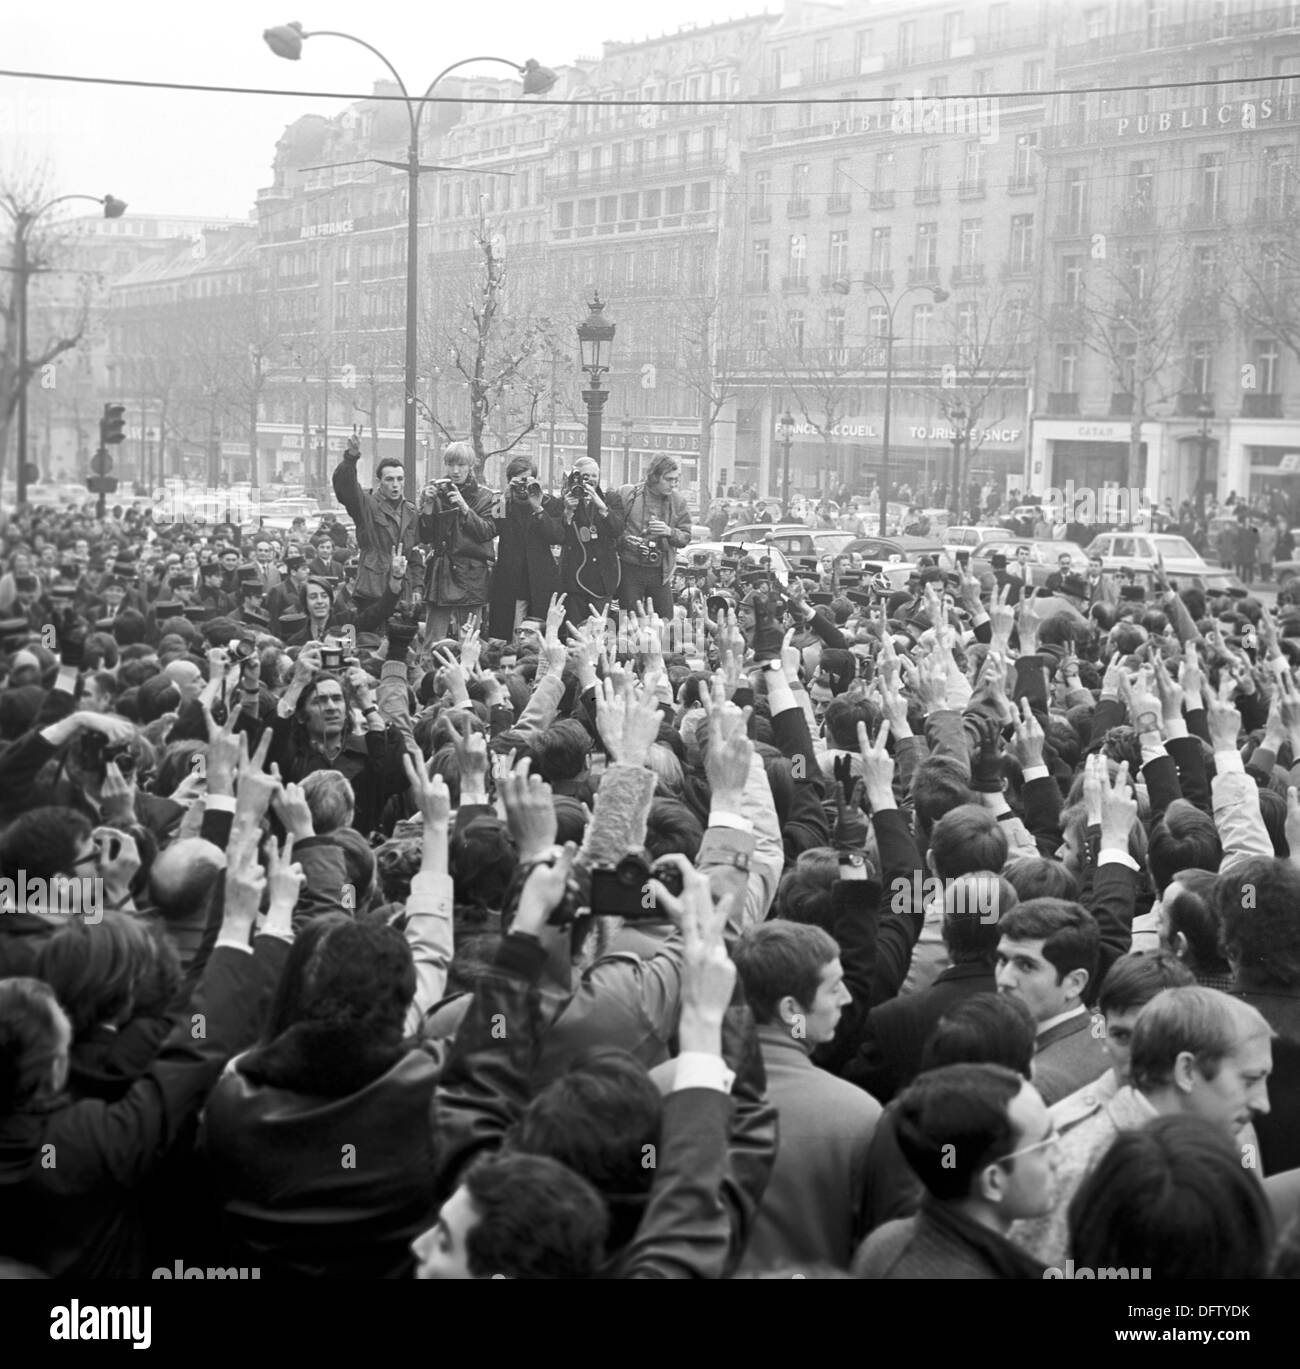 View of a demonstration on the Champs-Élysées on the occasion of the renaming of the Place de l'Etoile to Place Charles-de-Gaulle in Paris, France, 13 November 1970. The square was renamed to honour former president de Gaulle who had died recently. The center of the star square is the Arc de Triomphe. Photo. Wilfried Glienke Stock Photo